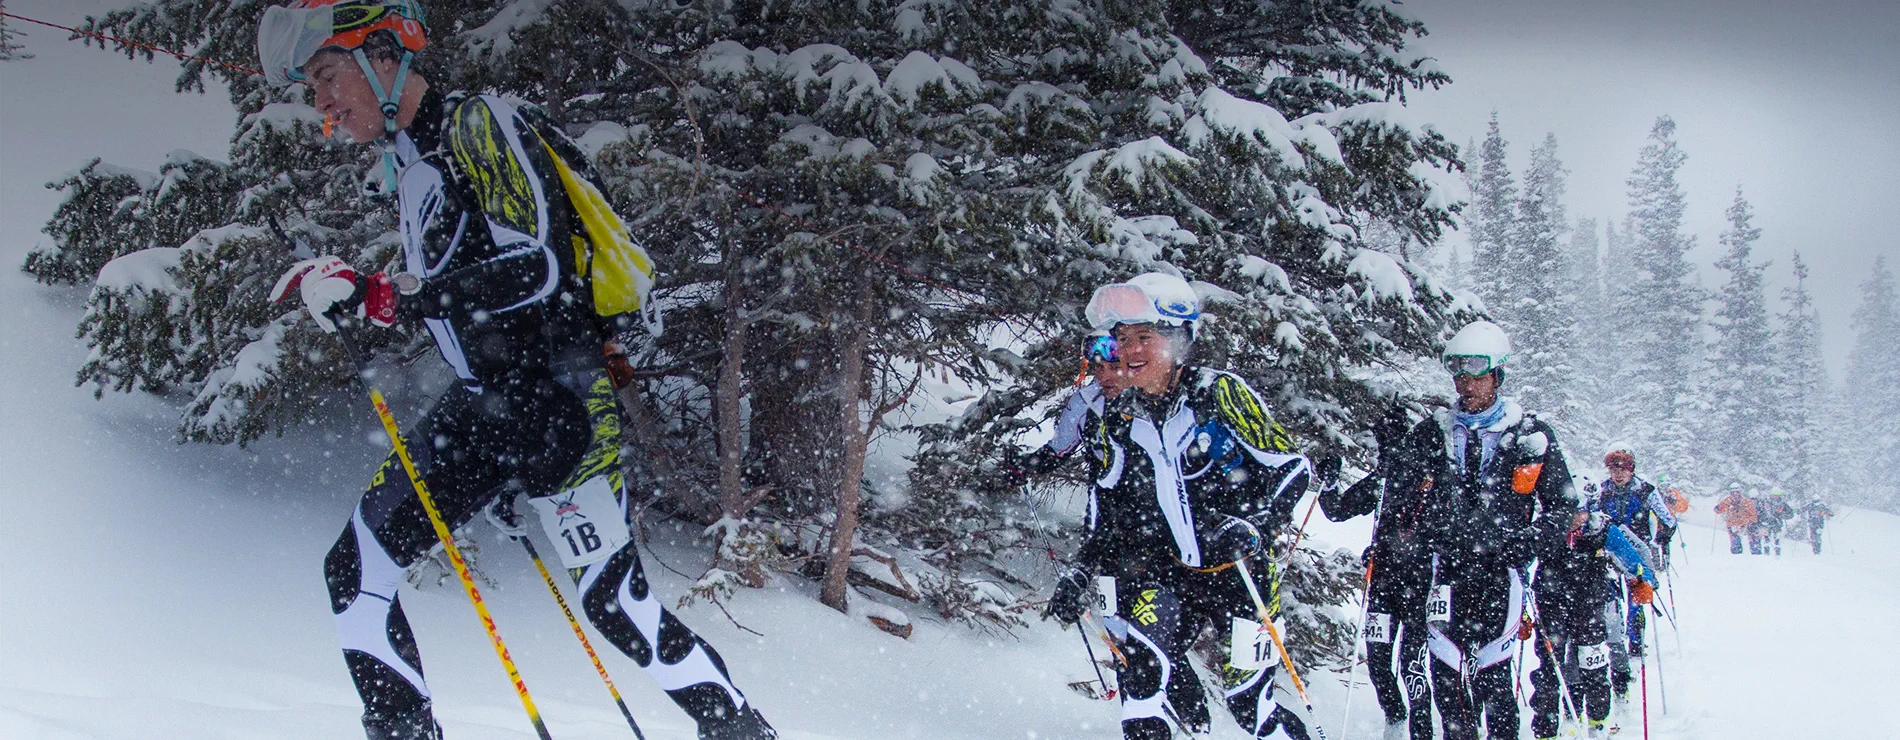 skiers at Power of Four Skimo event